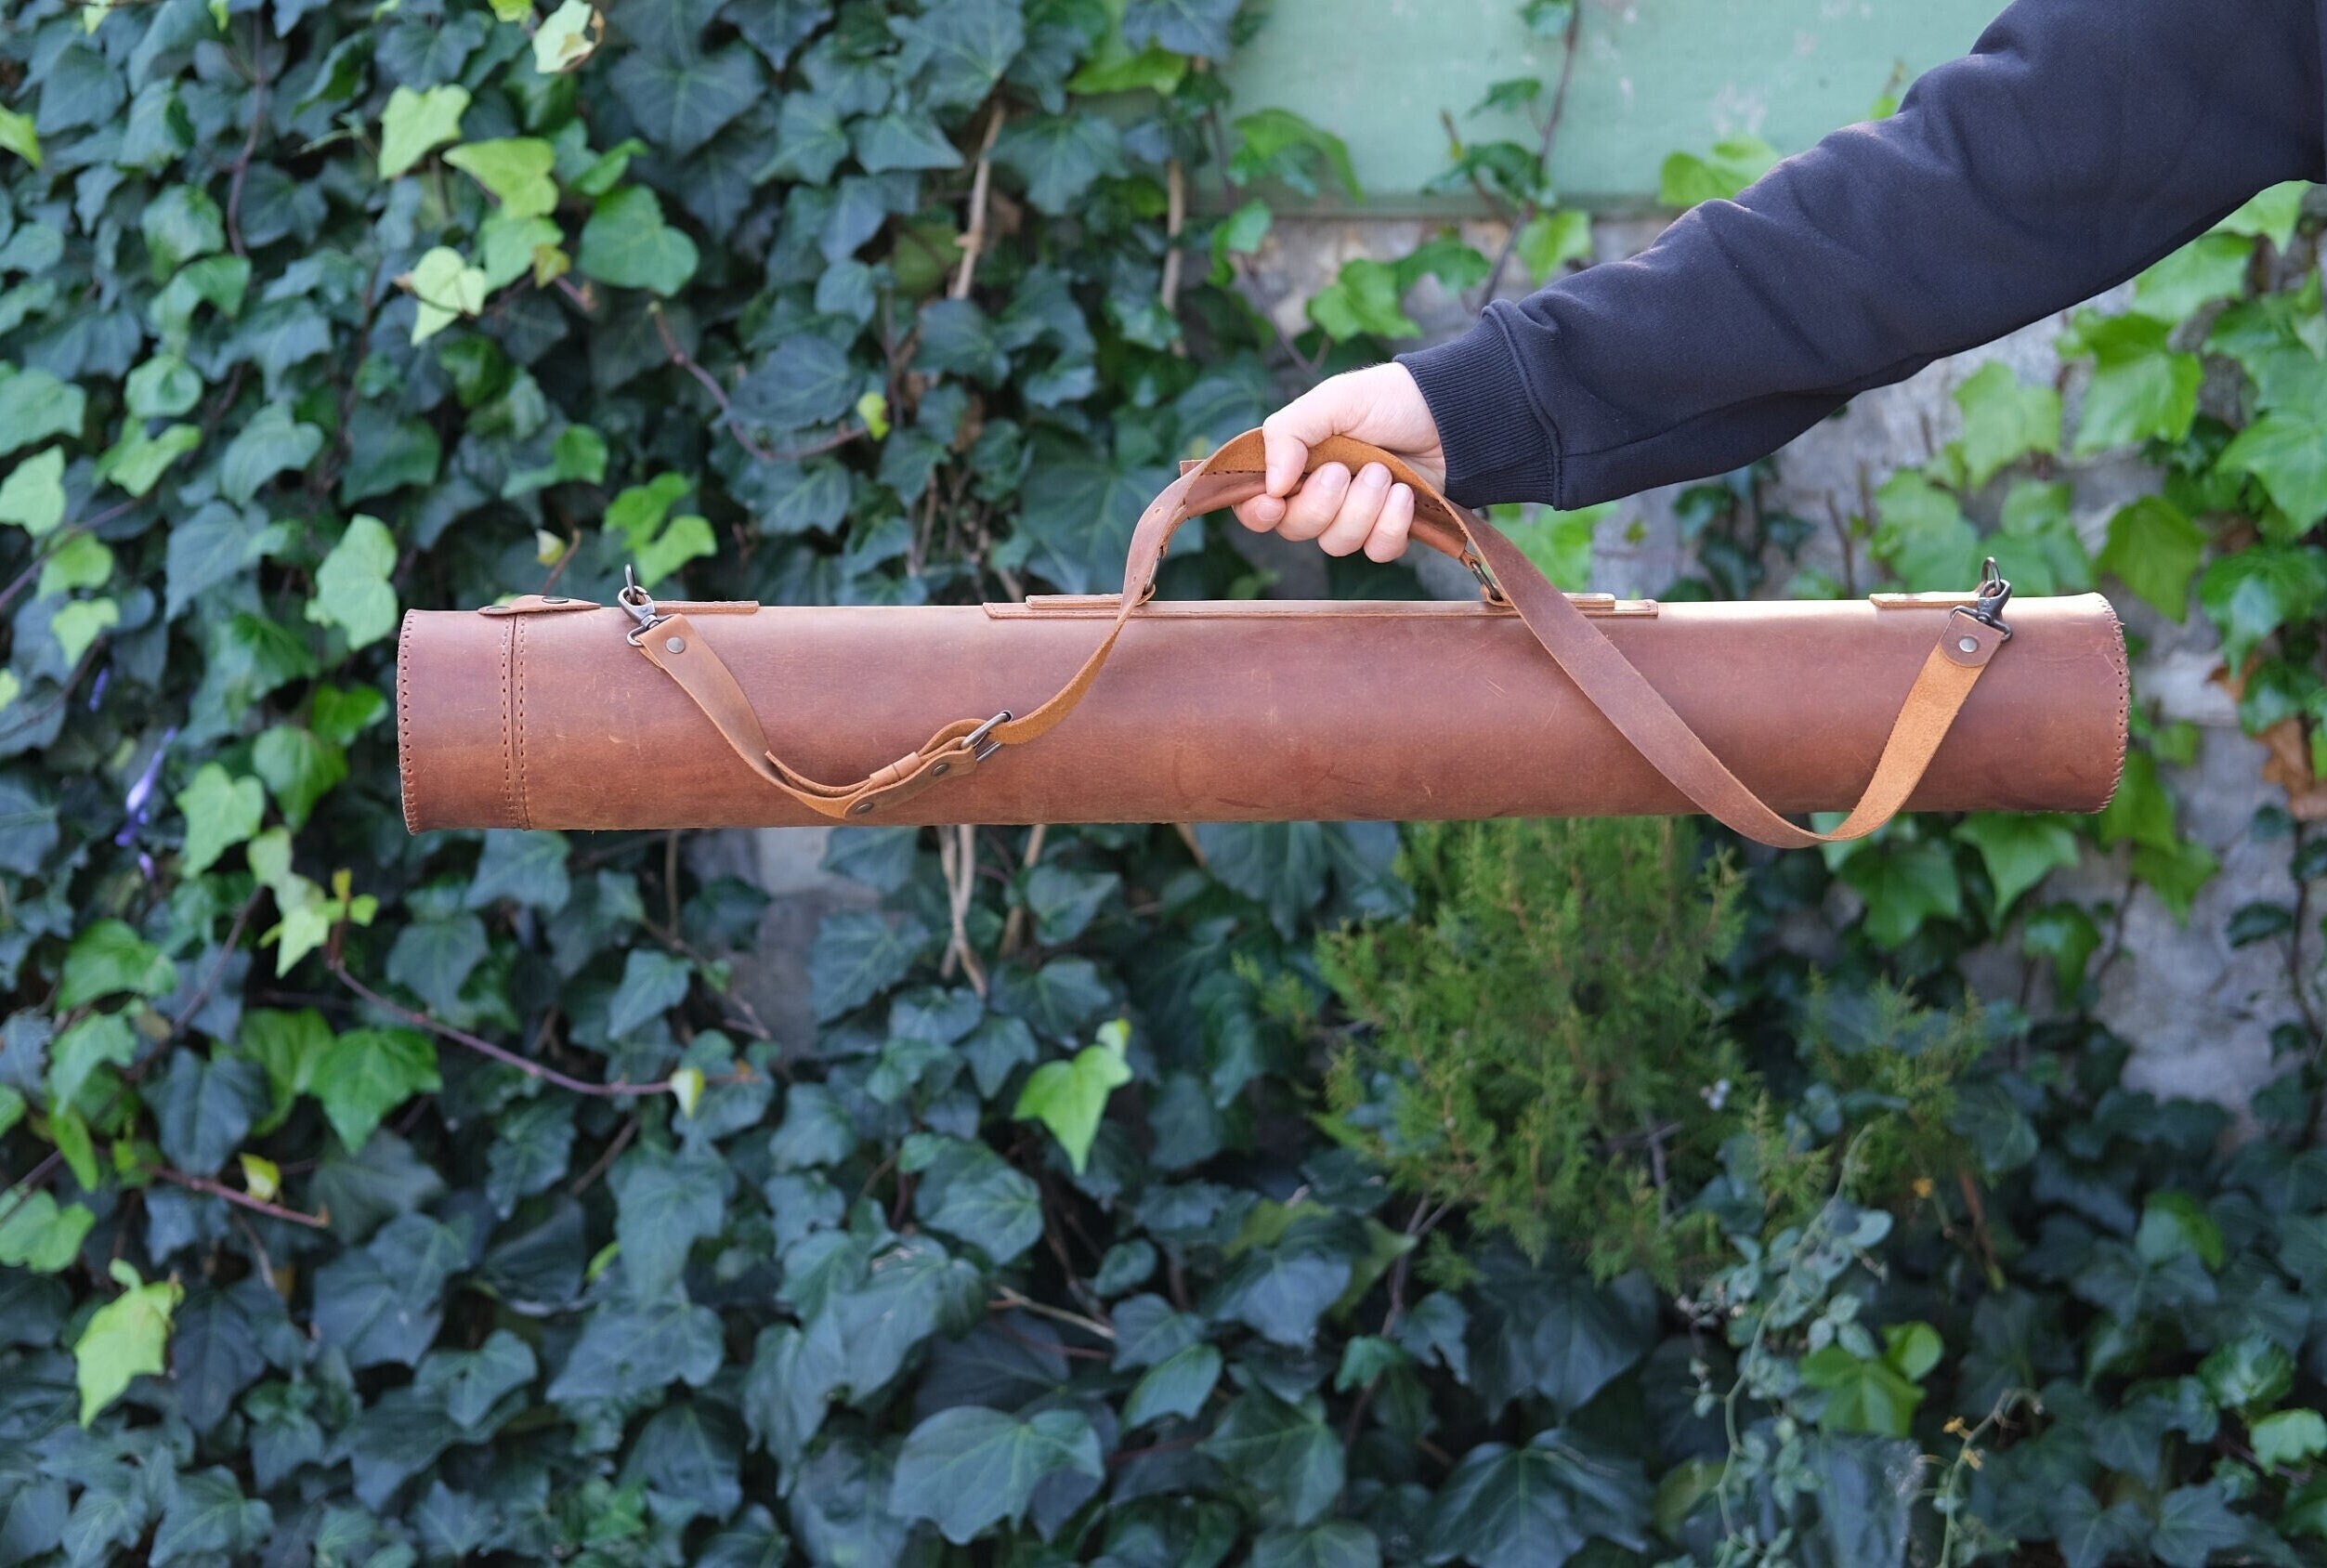 Leather Map Tube - Blueprint or Photography Carrying Case – Hoi An Soul